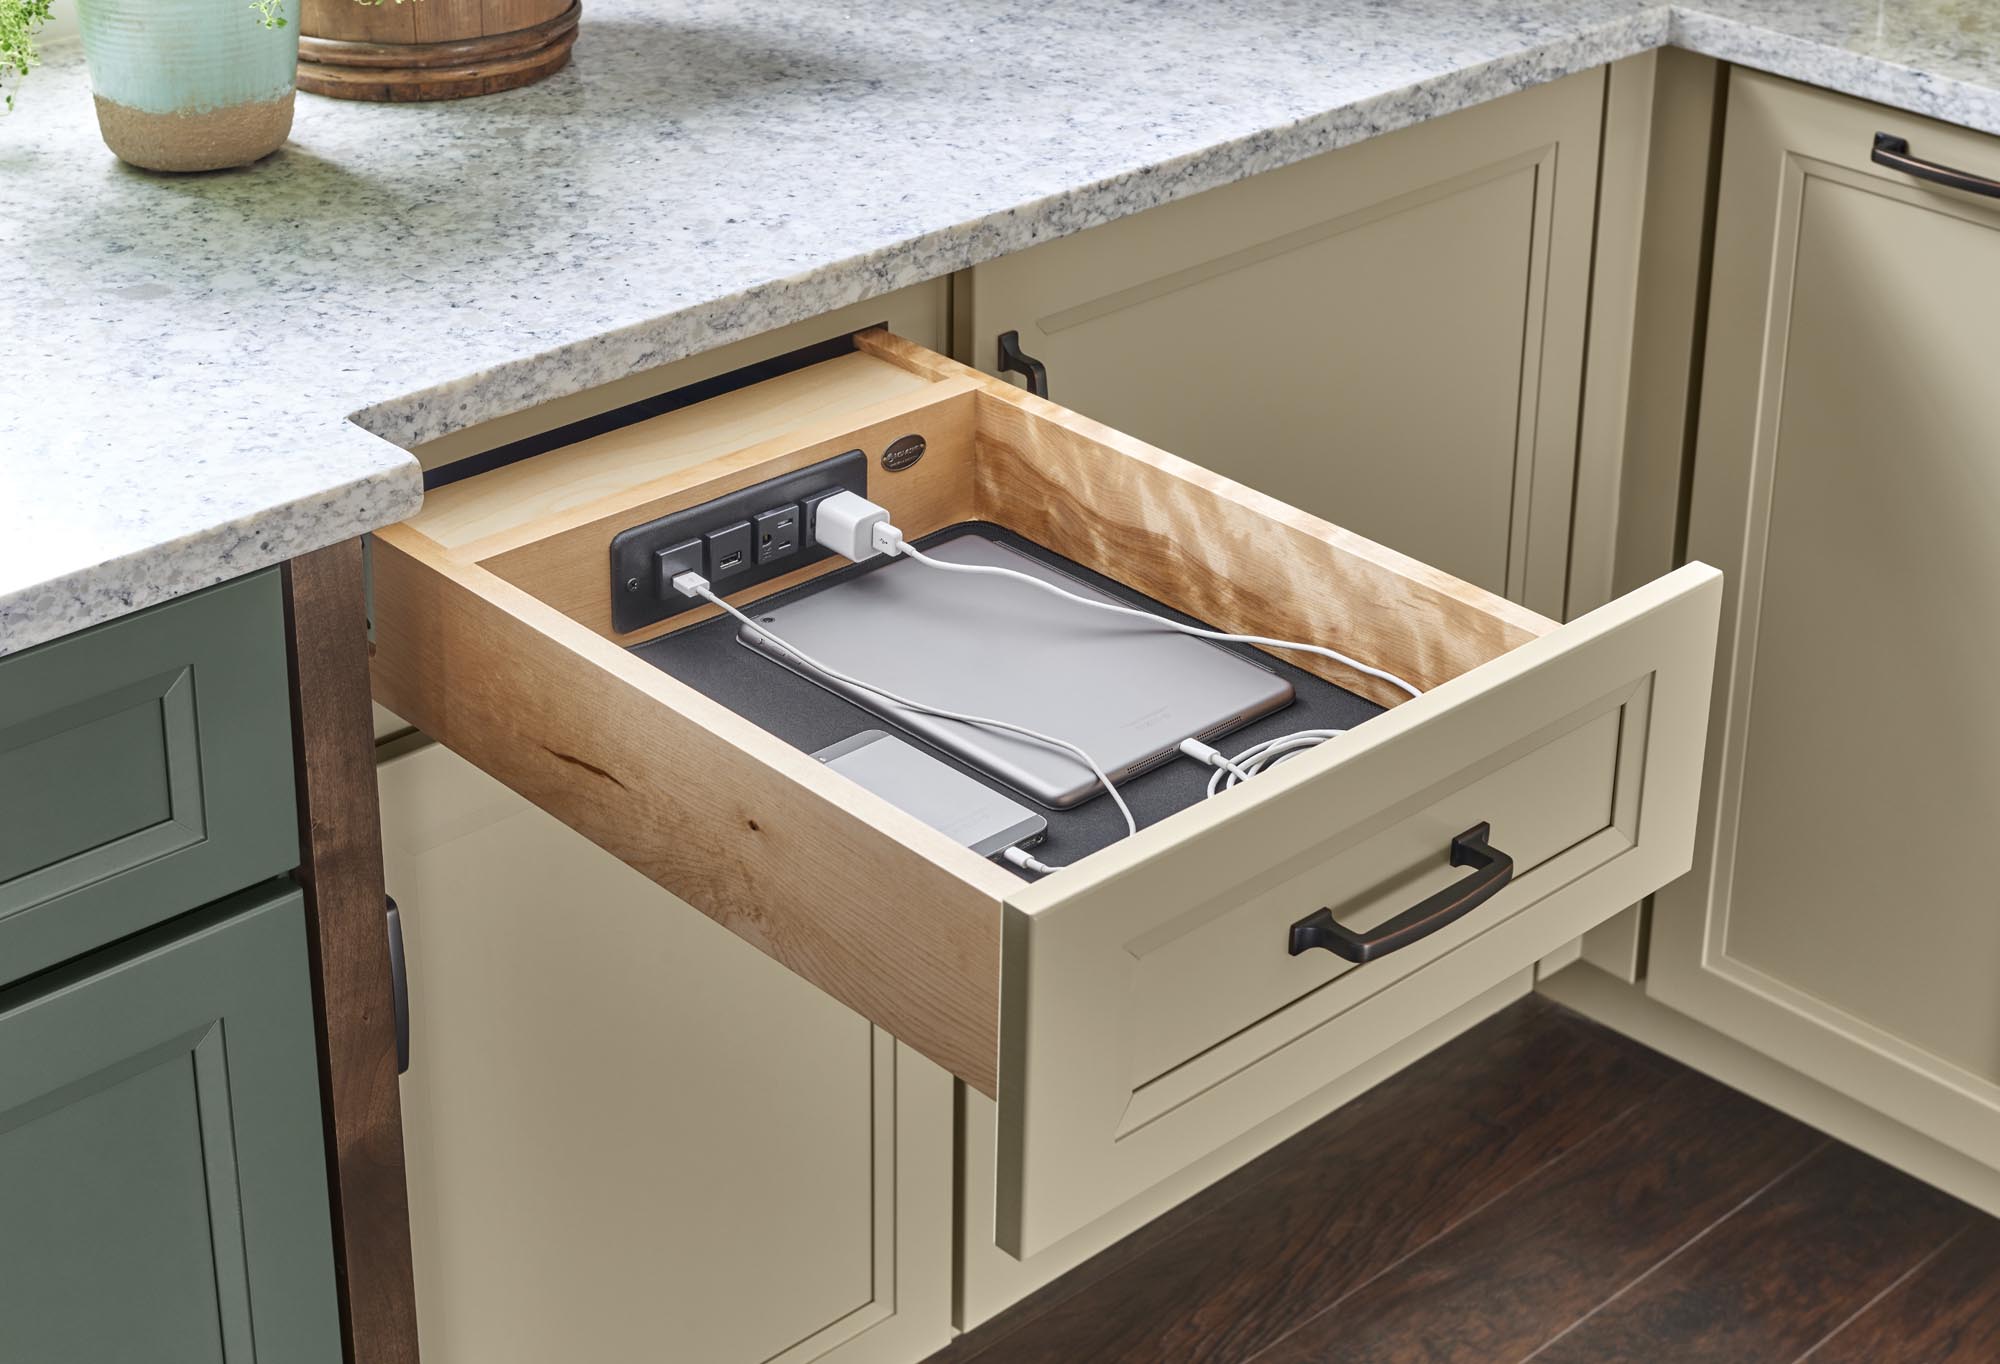 Medallion Cabinetry - Tiered Cutlery Divider Drawer